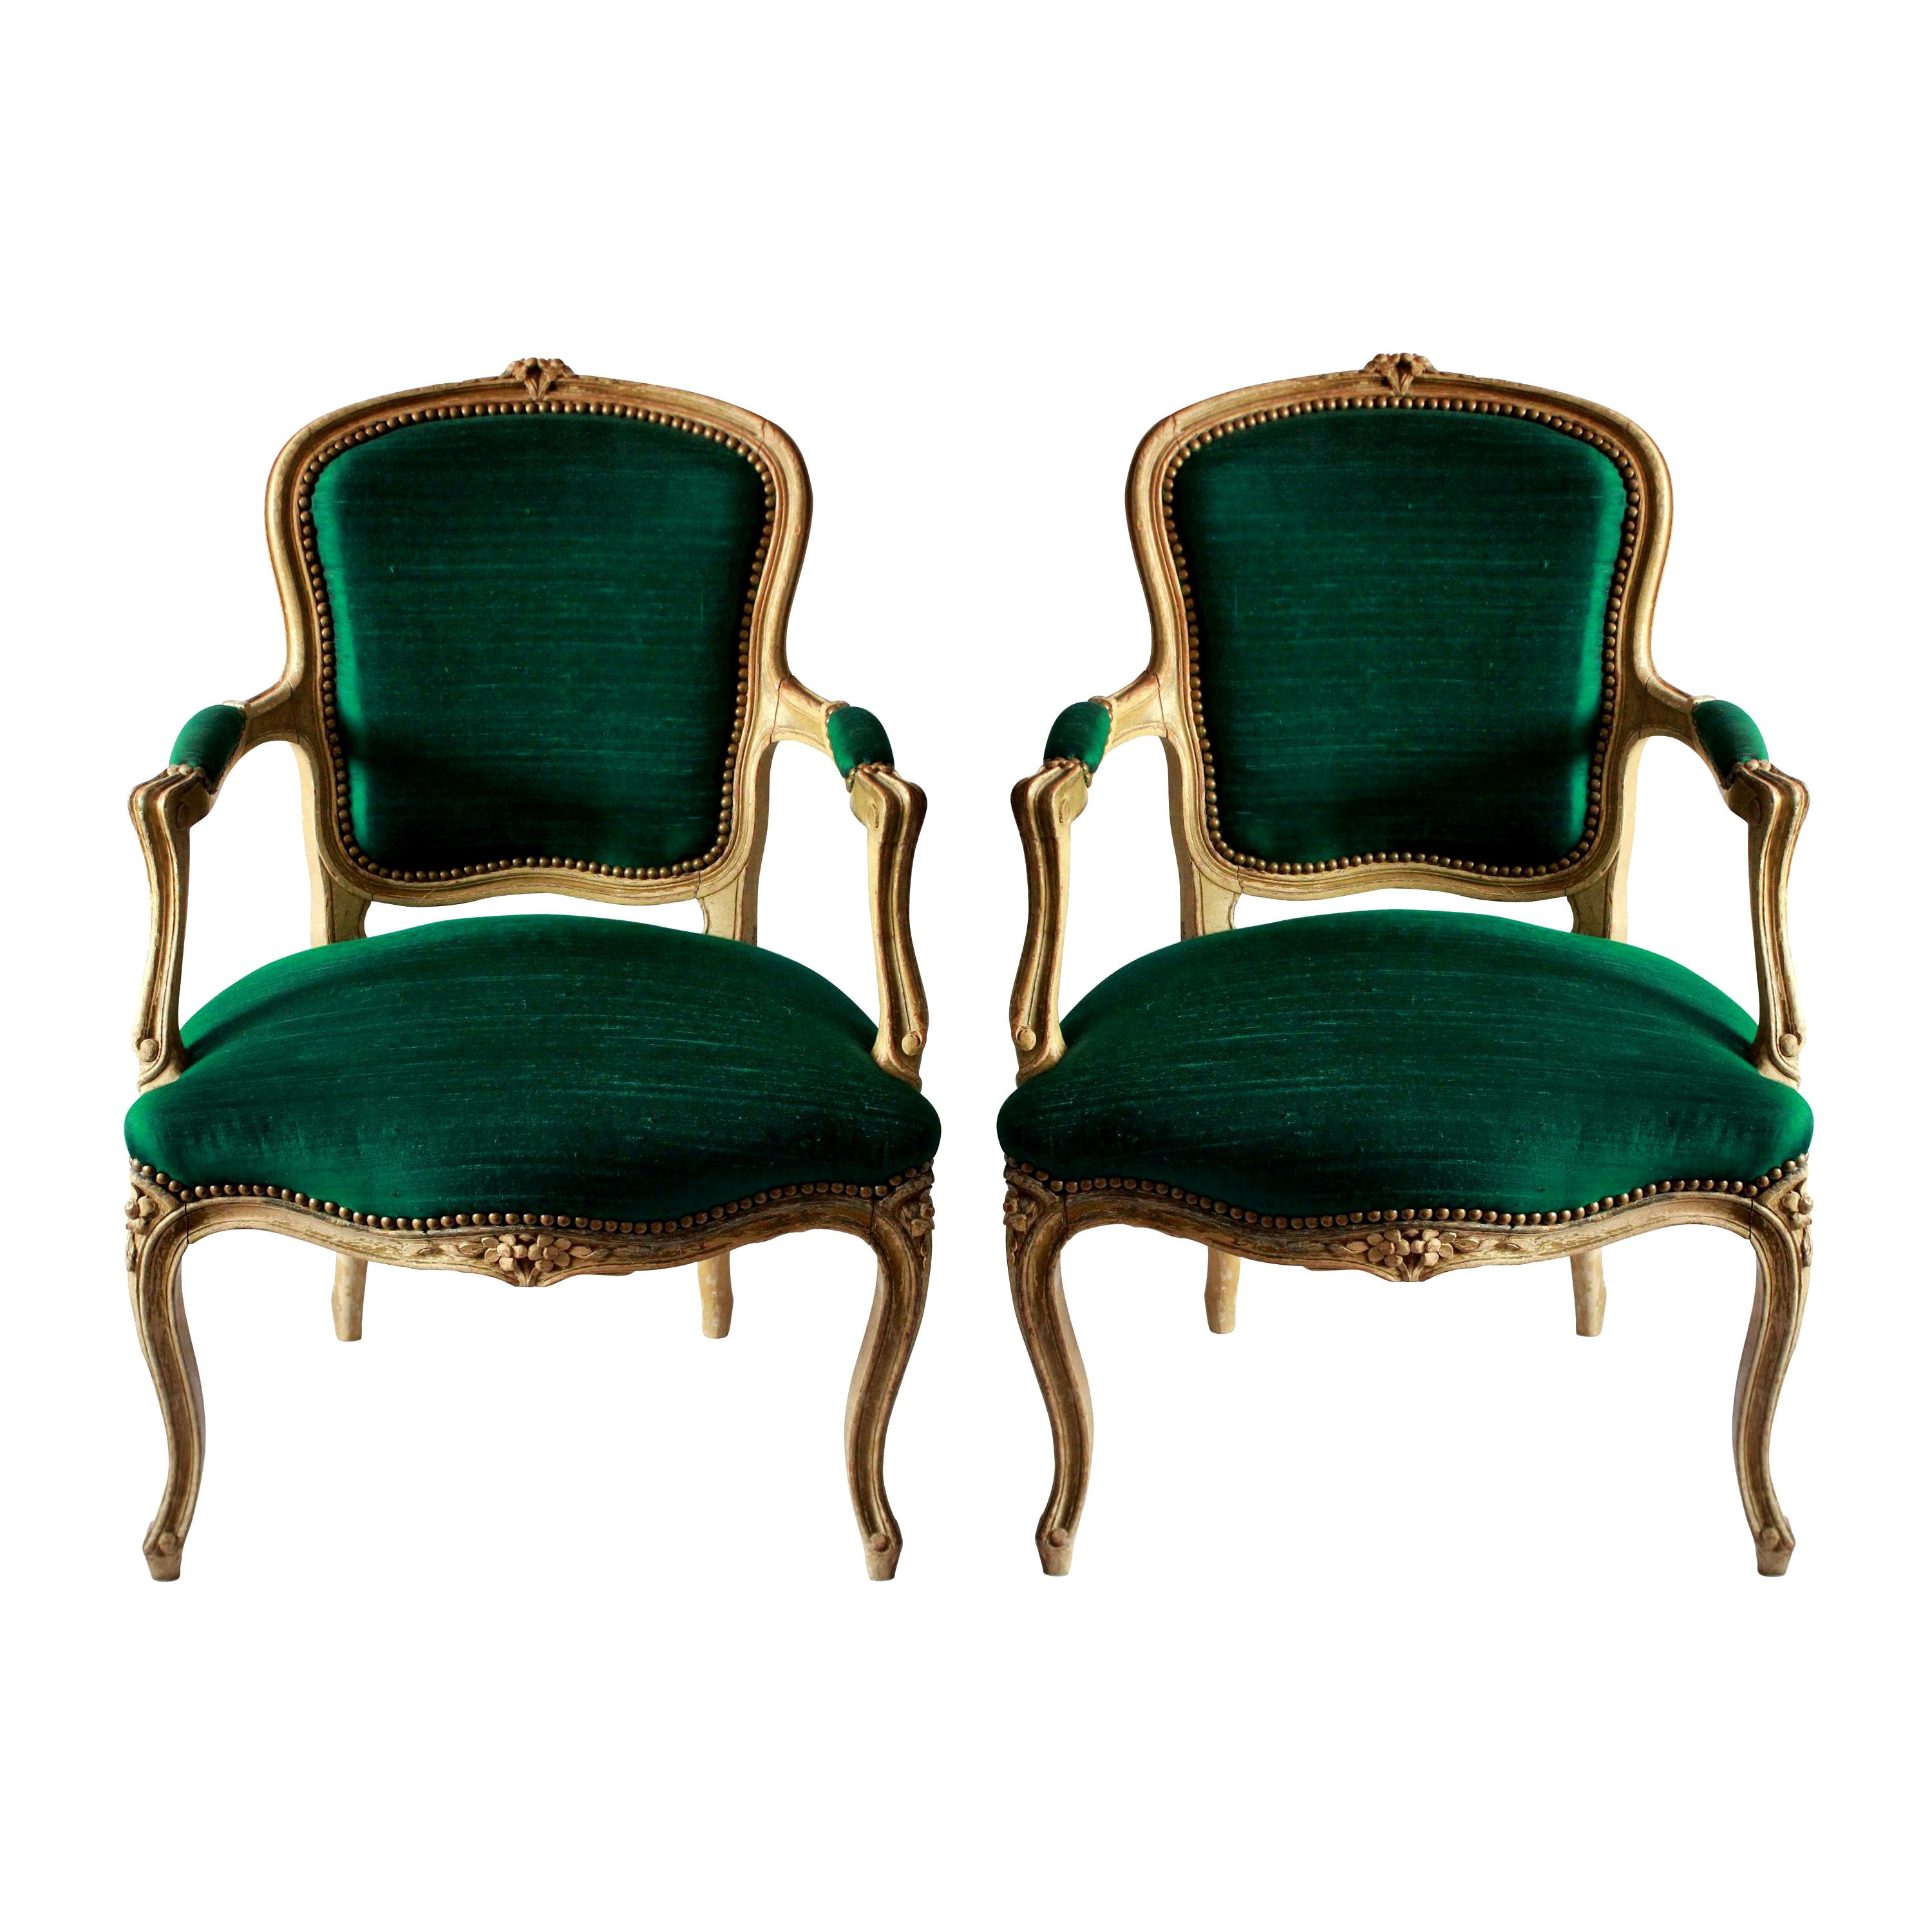 Pair of 18th Century French Armchairs in Emerald Silk